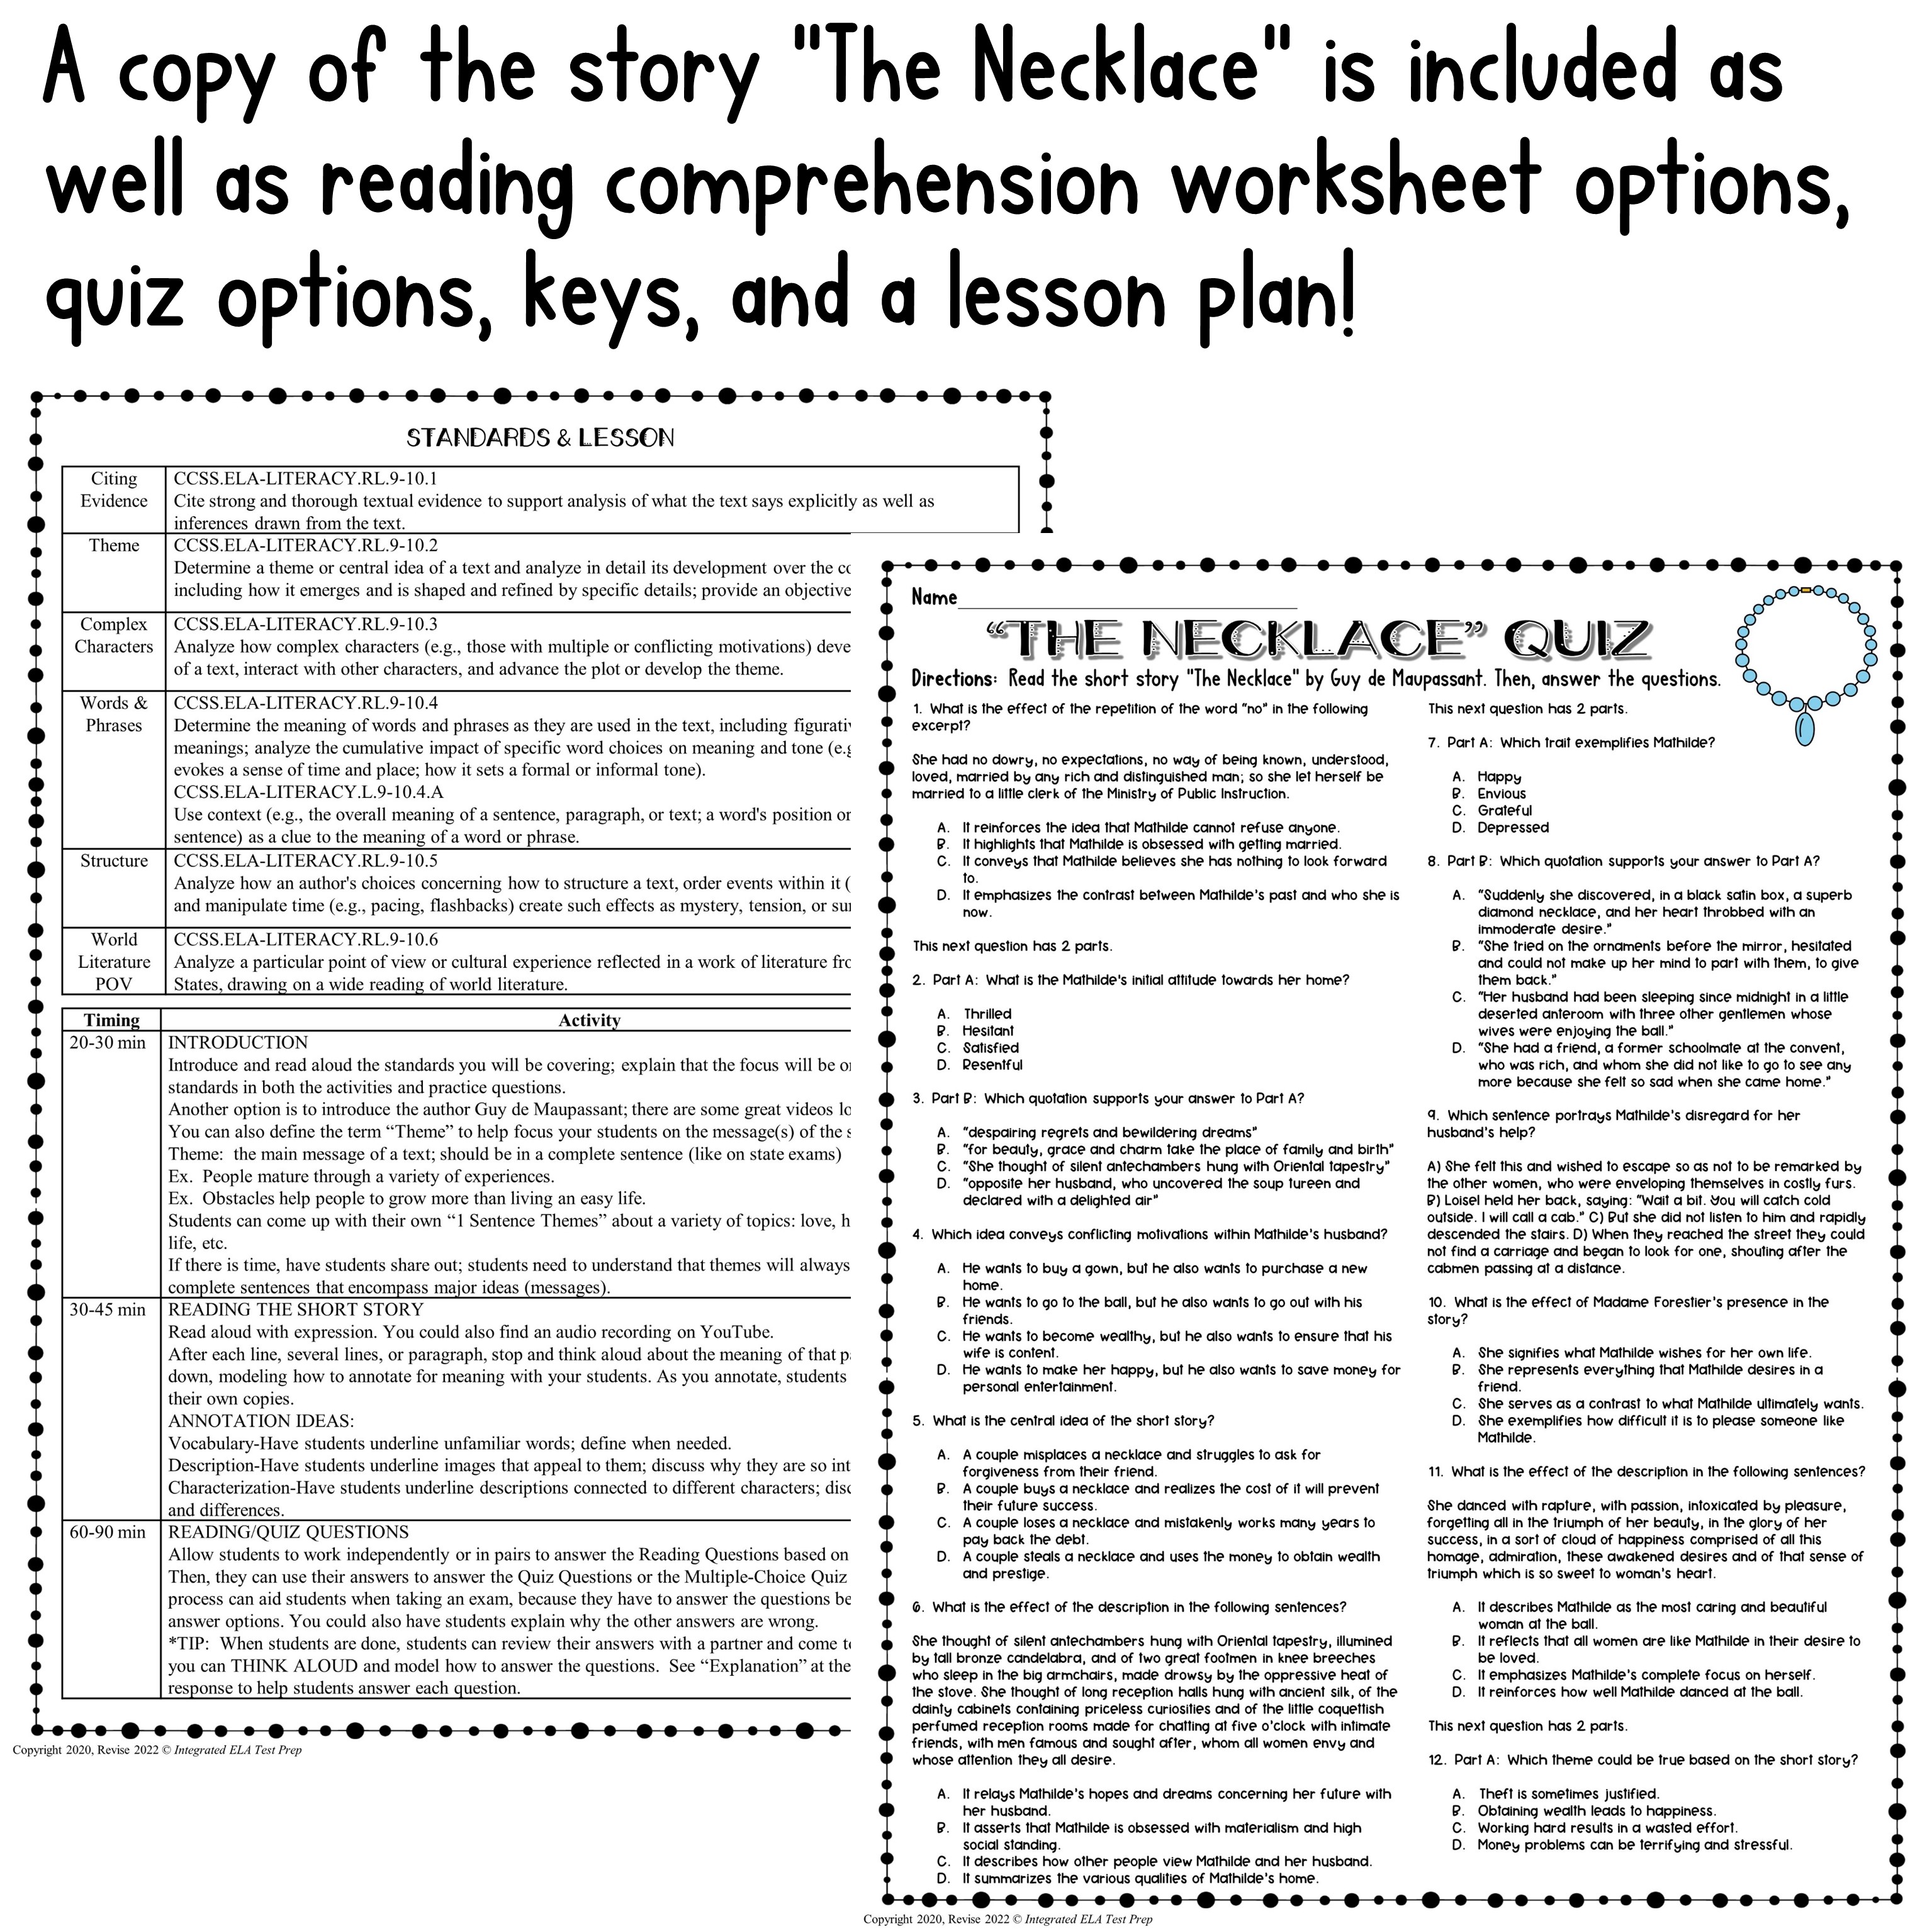 The Necklace - Quiz online exercise for | Live Worksheets